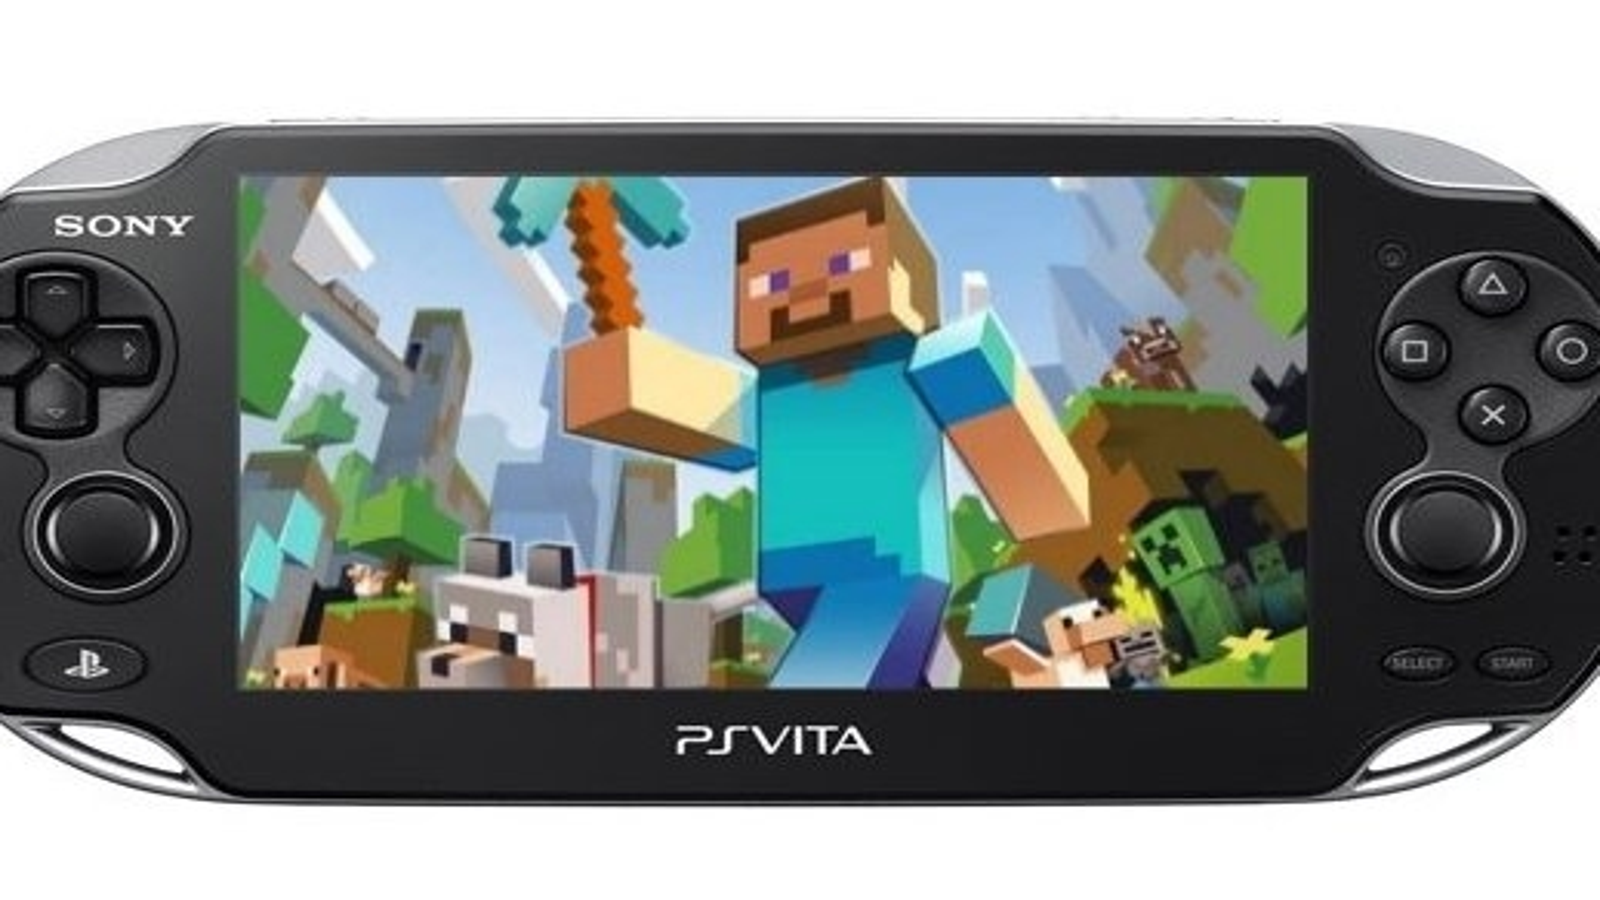 4J Studios on X: We've handed Minecraft: PlayStation®Vita Edition over to  Sony for final test! #MinecraftPSVita  / X